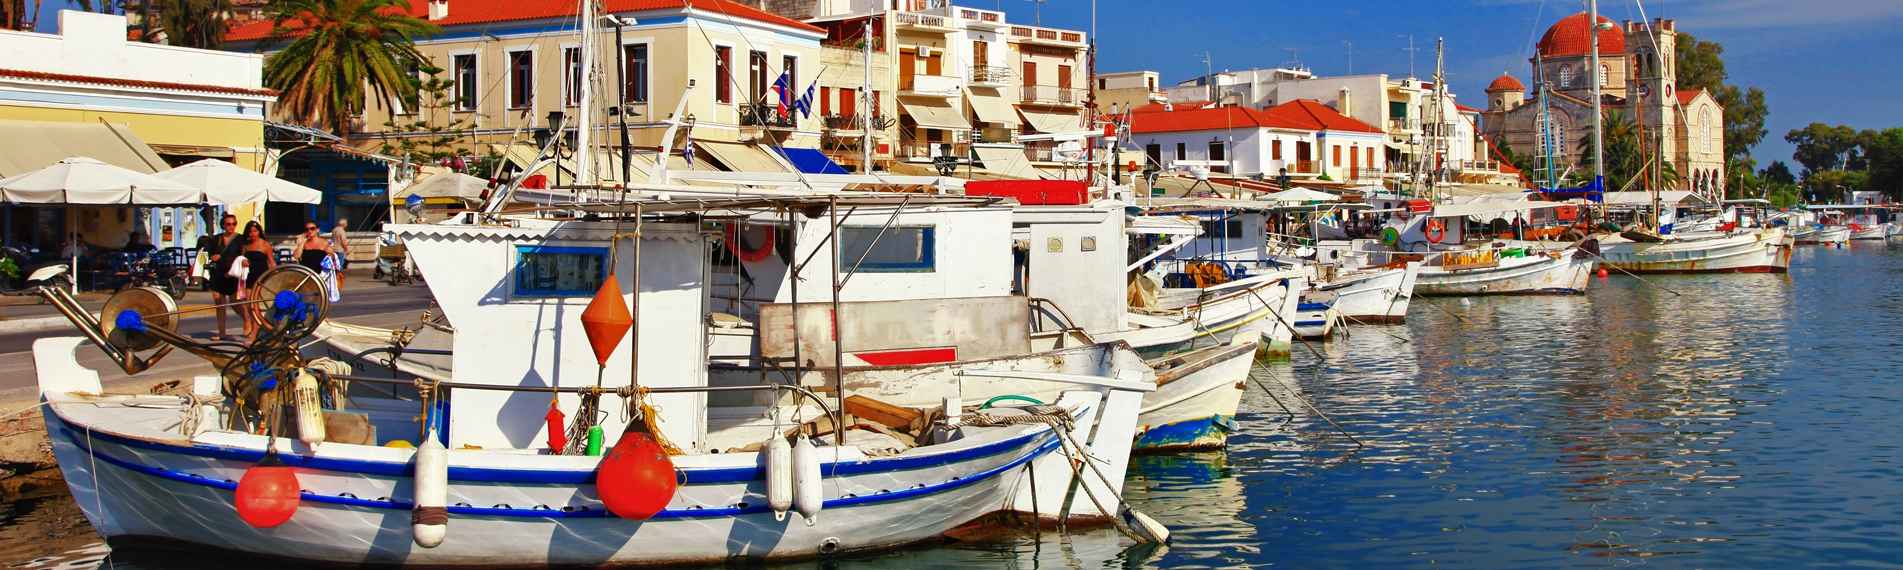 Boats docked at the port on the island of Aegina.